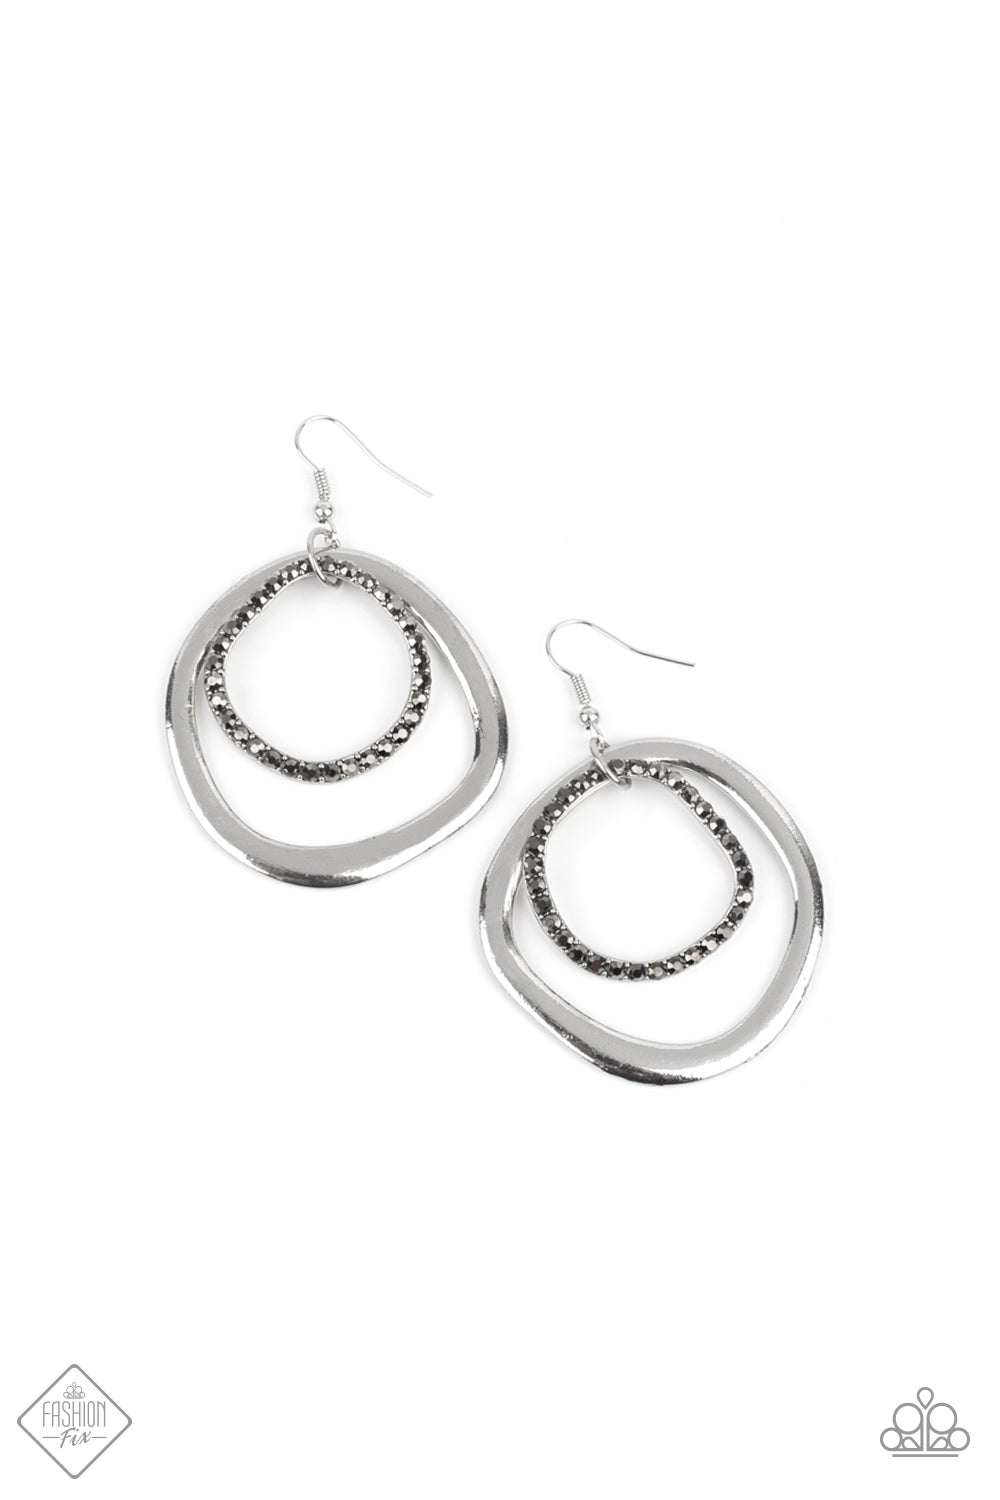 Spinning With Sass - Silver Earrings Fashion Fix June 2021 4088